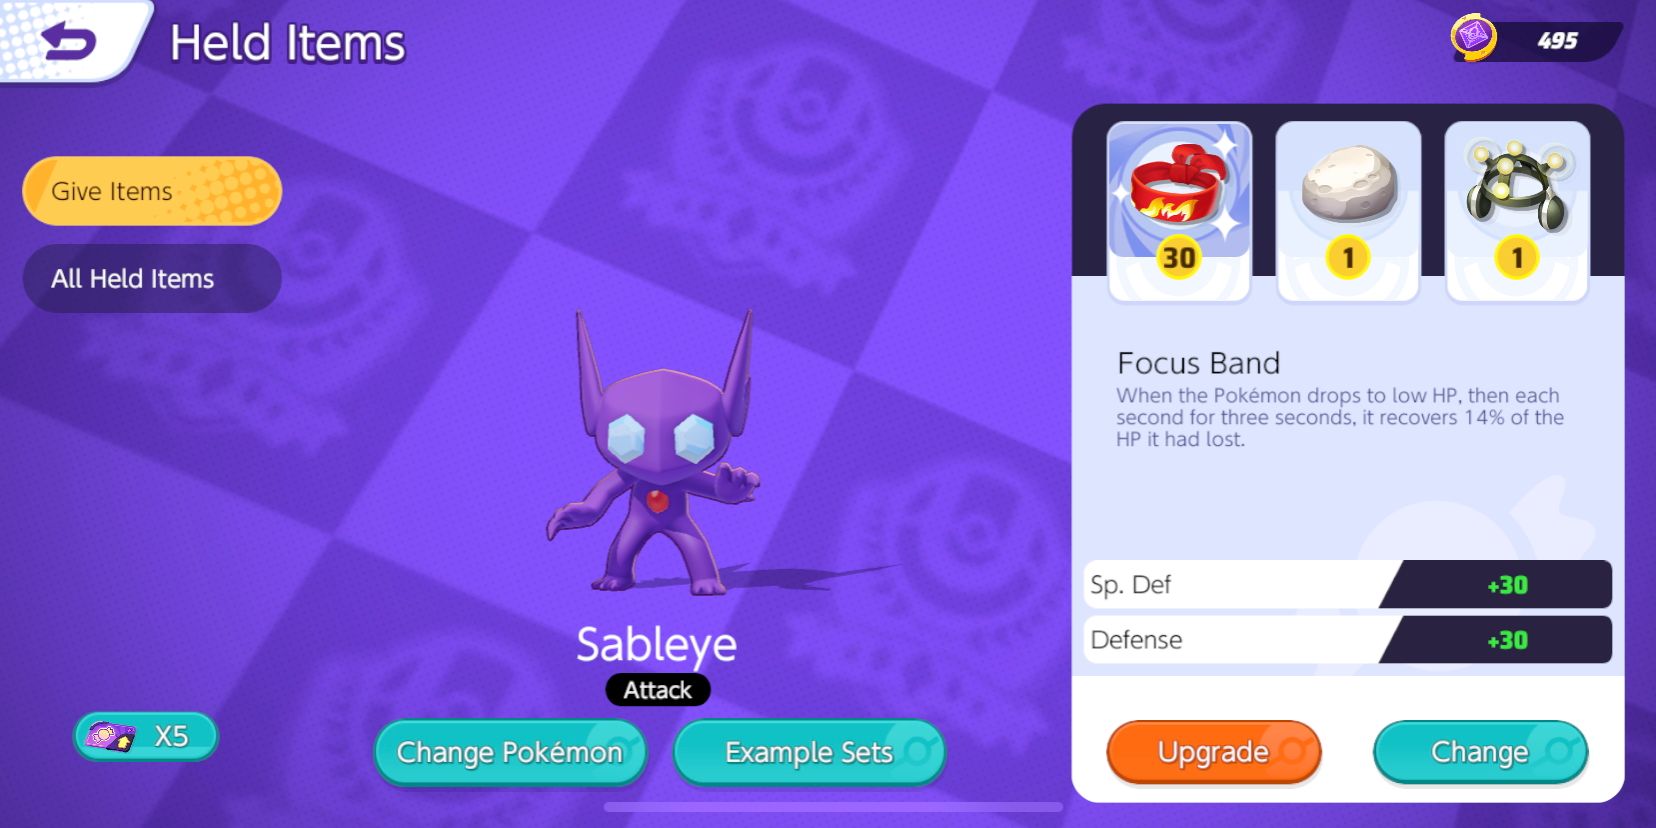 Sableye Held Item selection screen with Focus Band, Float Stone, and Exp. Share chosen